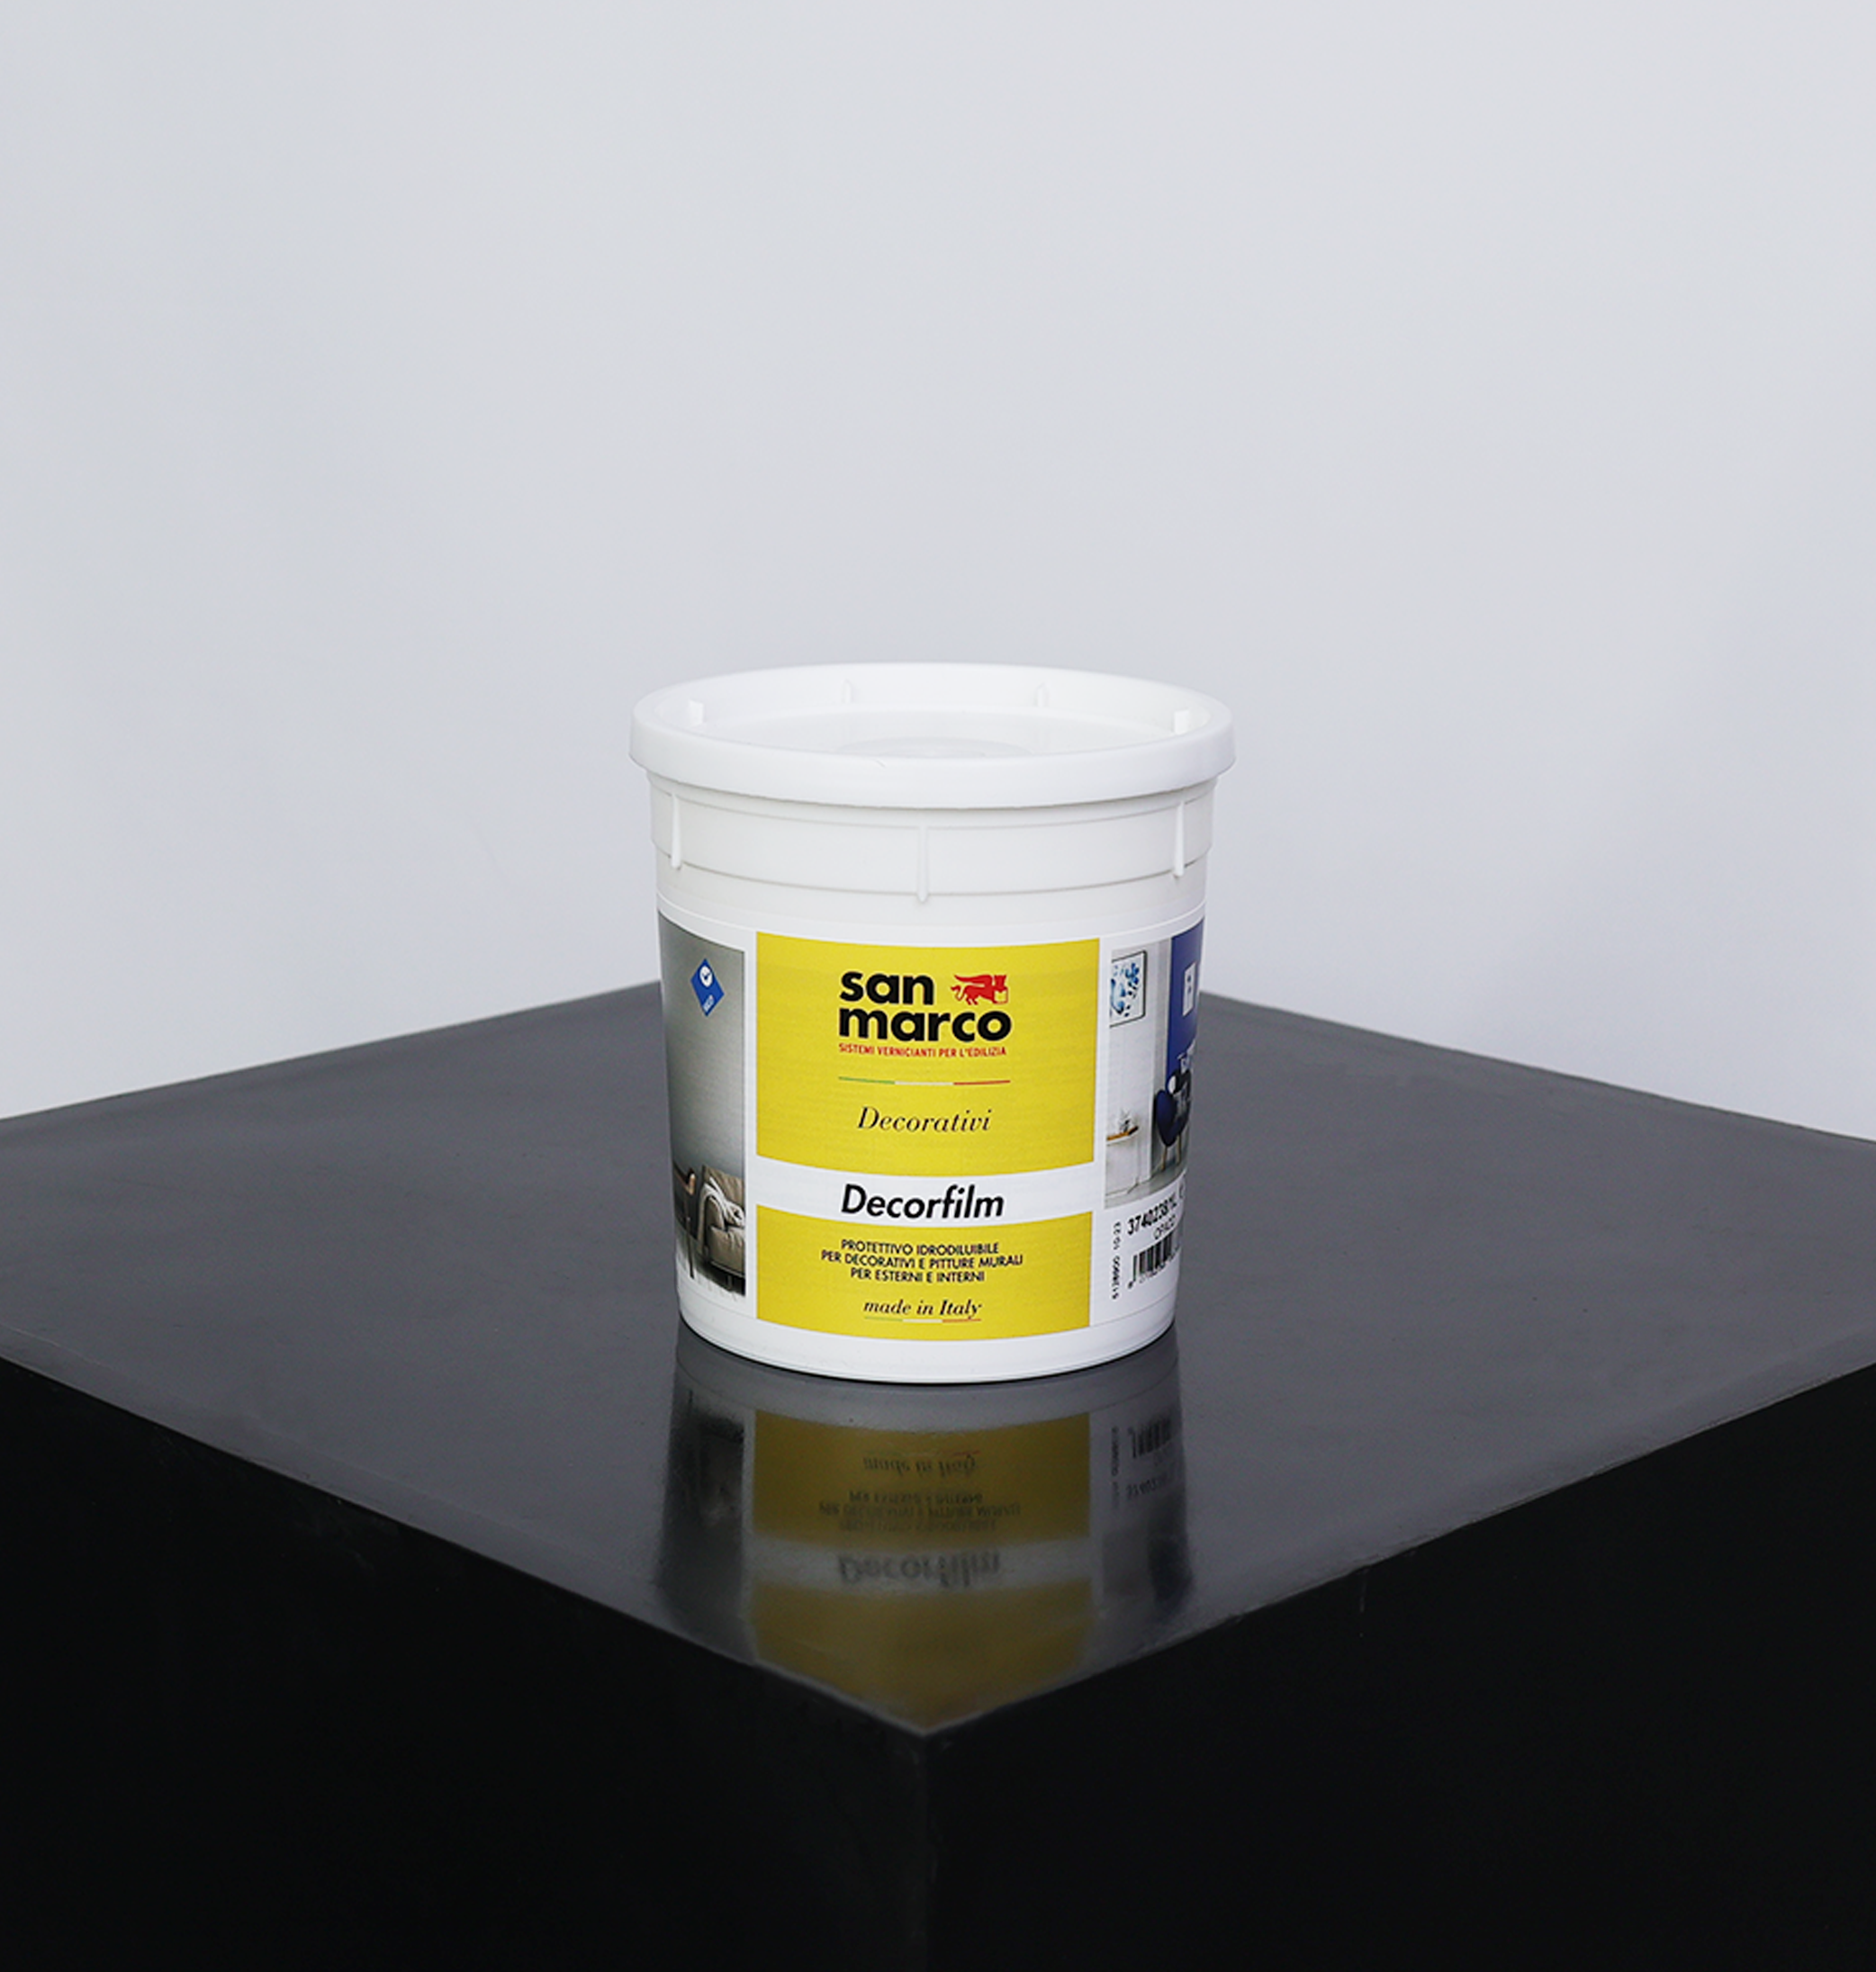 Decorfilm - Water-Based Protector For Decorative Paints & Plasters For Use On Interiors & Exteriors